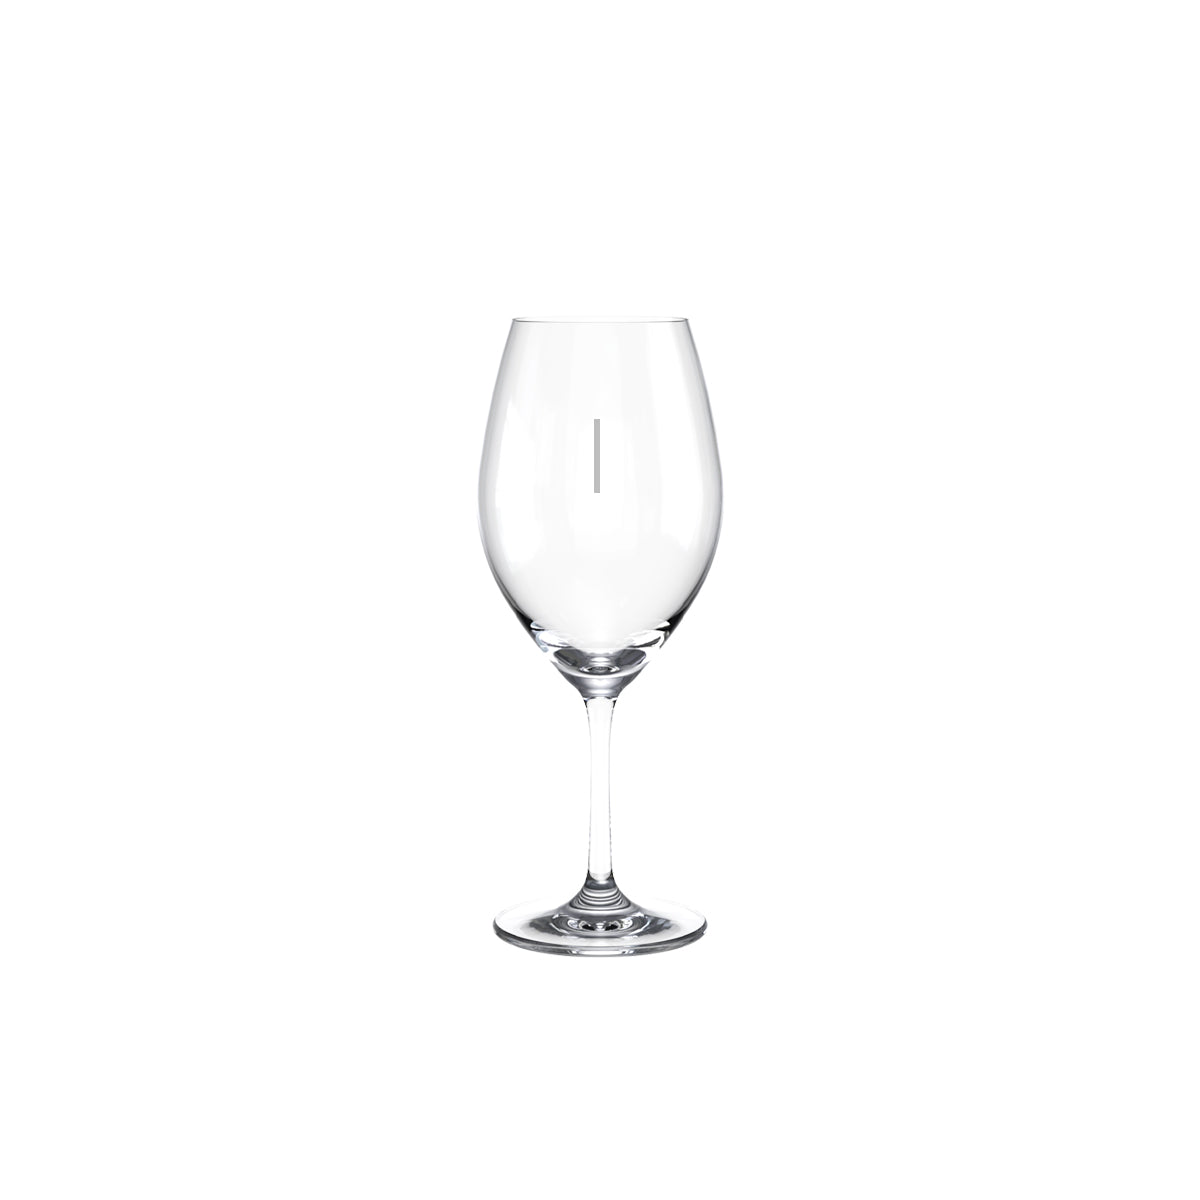 Melody Chianti - 375Ml, Vertical Pour Line from Ryner Glass. Pour line printed and sold in boxes of 24. Hospitality quality at wholesale price with The Flying Fork! 